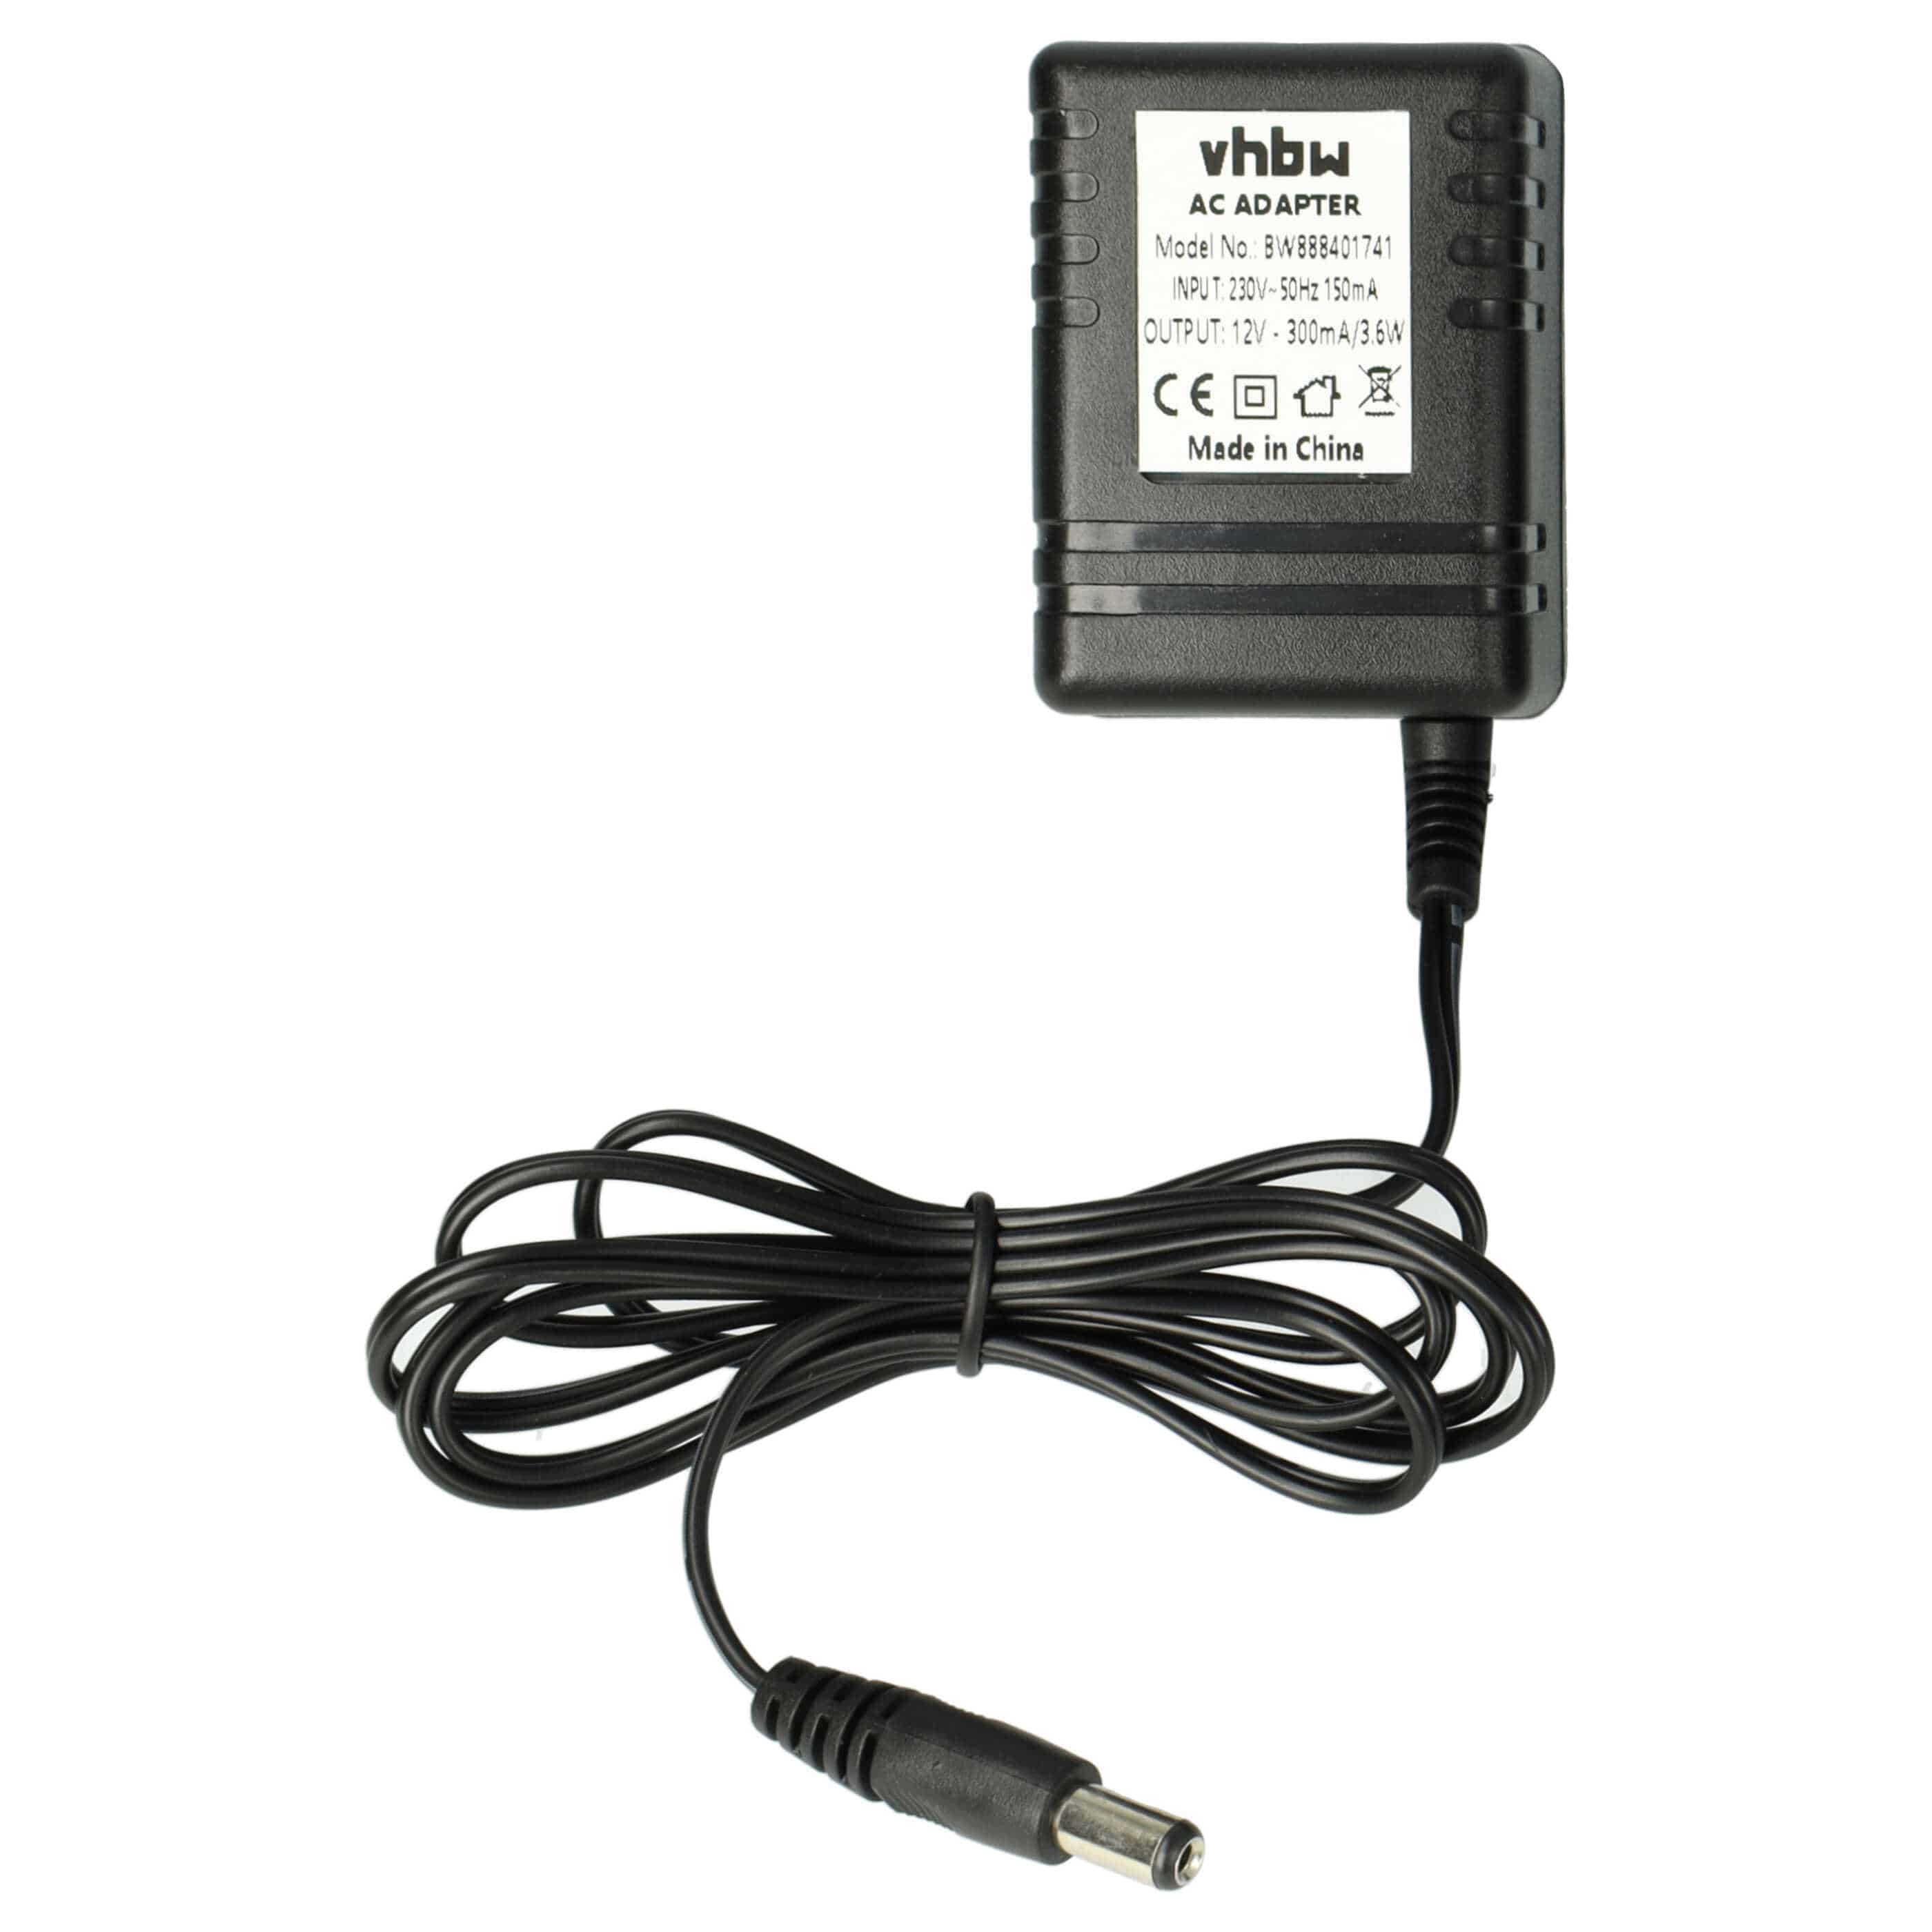 Charger Suitable for Kenwood CP-213 Radio Batteries - 15 V, 1.0 A